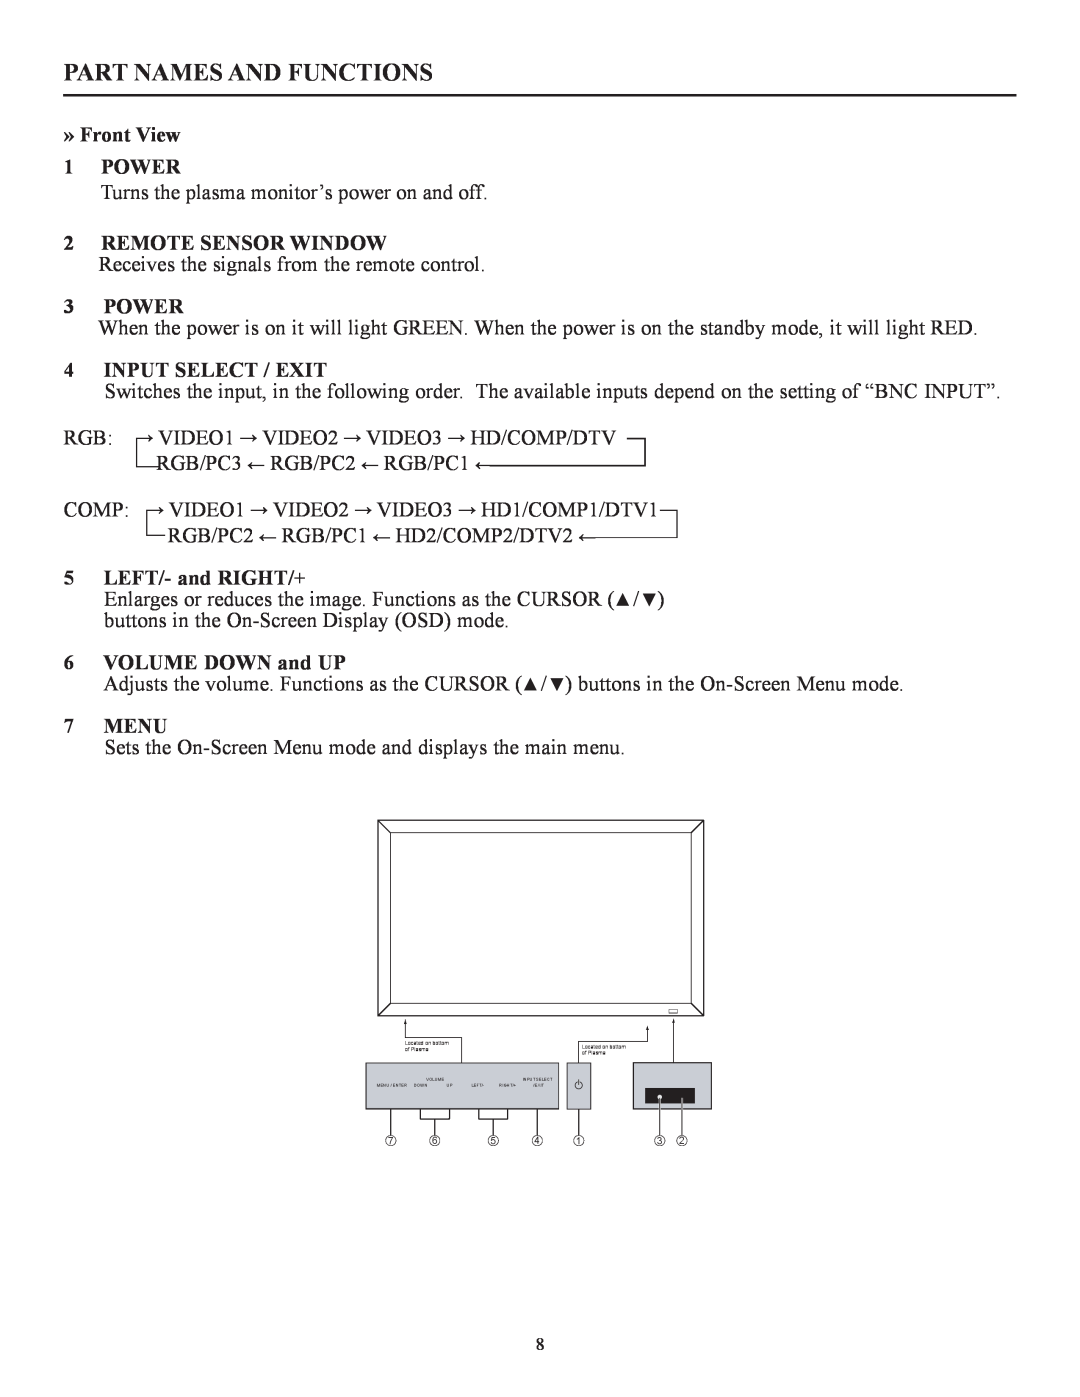 Runco CW-42i manual Part Names And Functions, » Front View 1 POWER, Power, Input Select / Exit, LEFT/- and RIGHT/+, Menu 